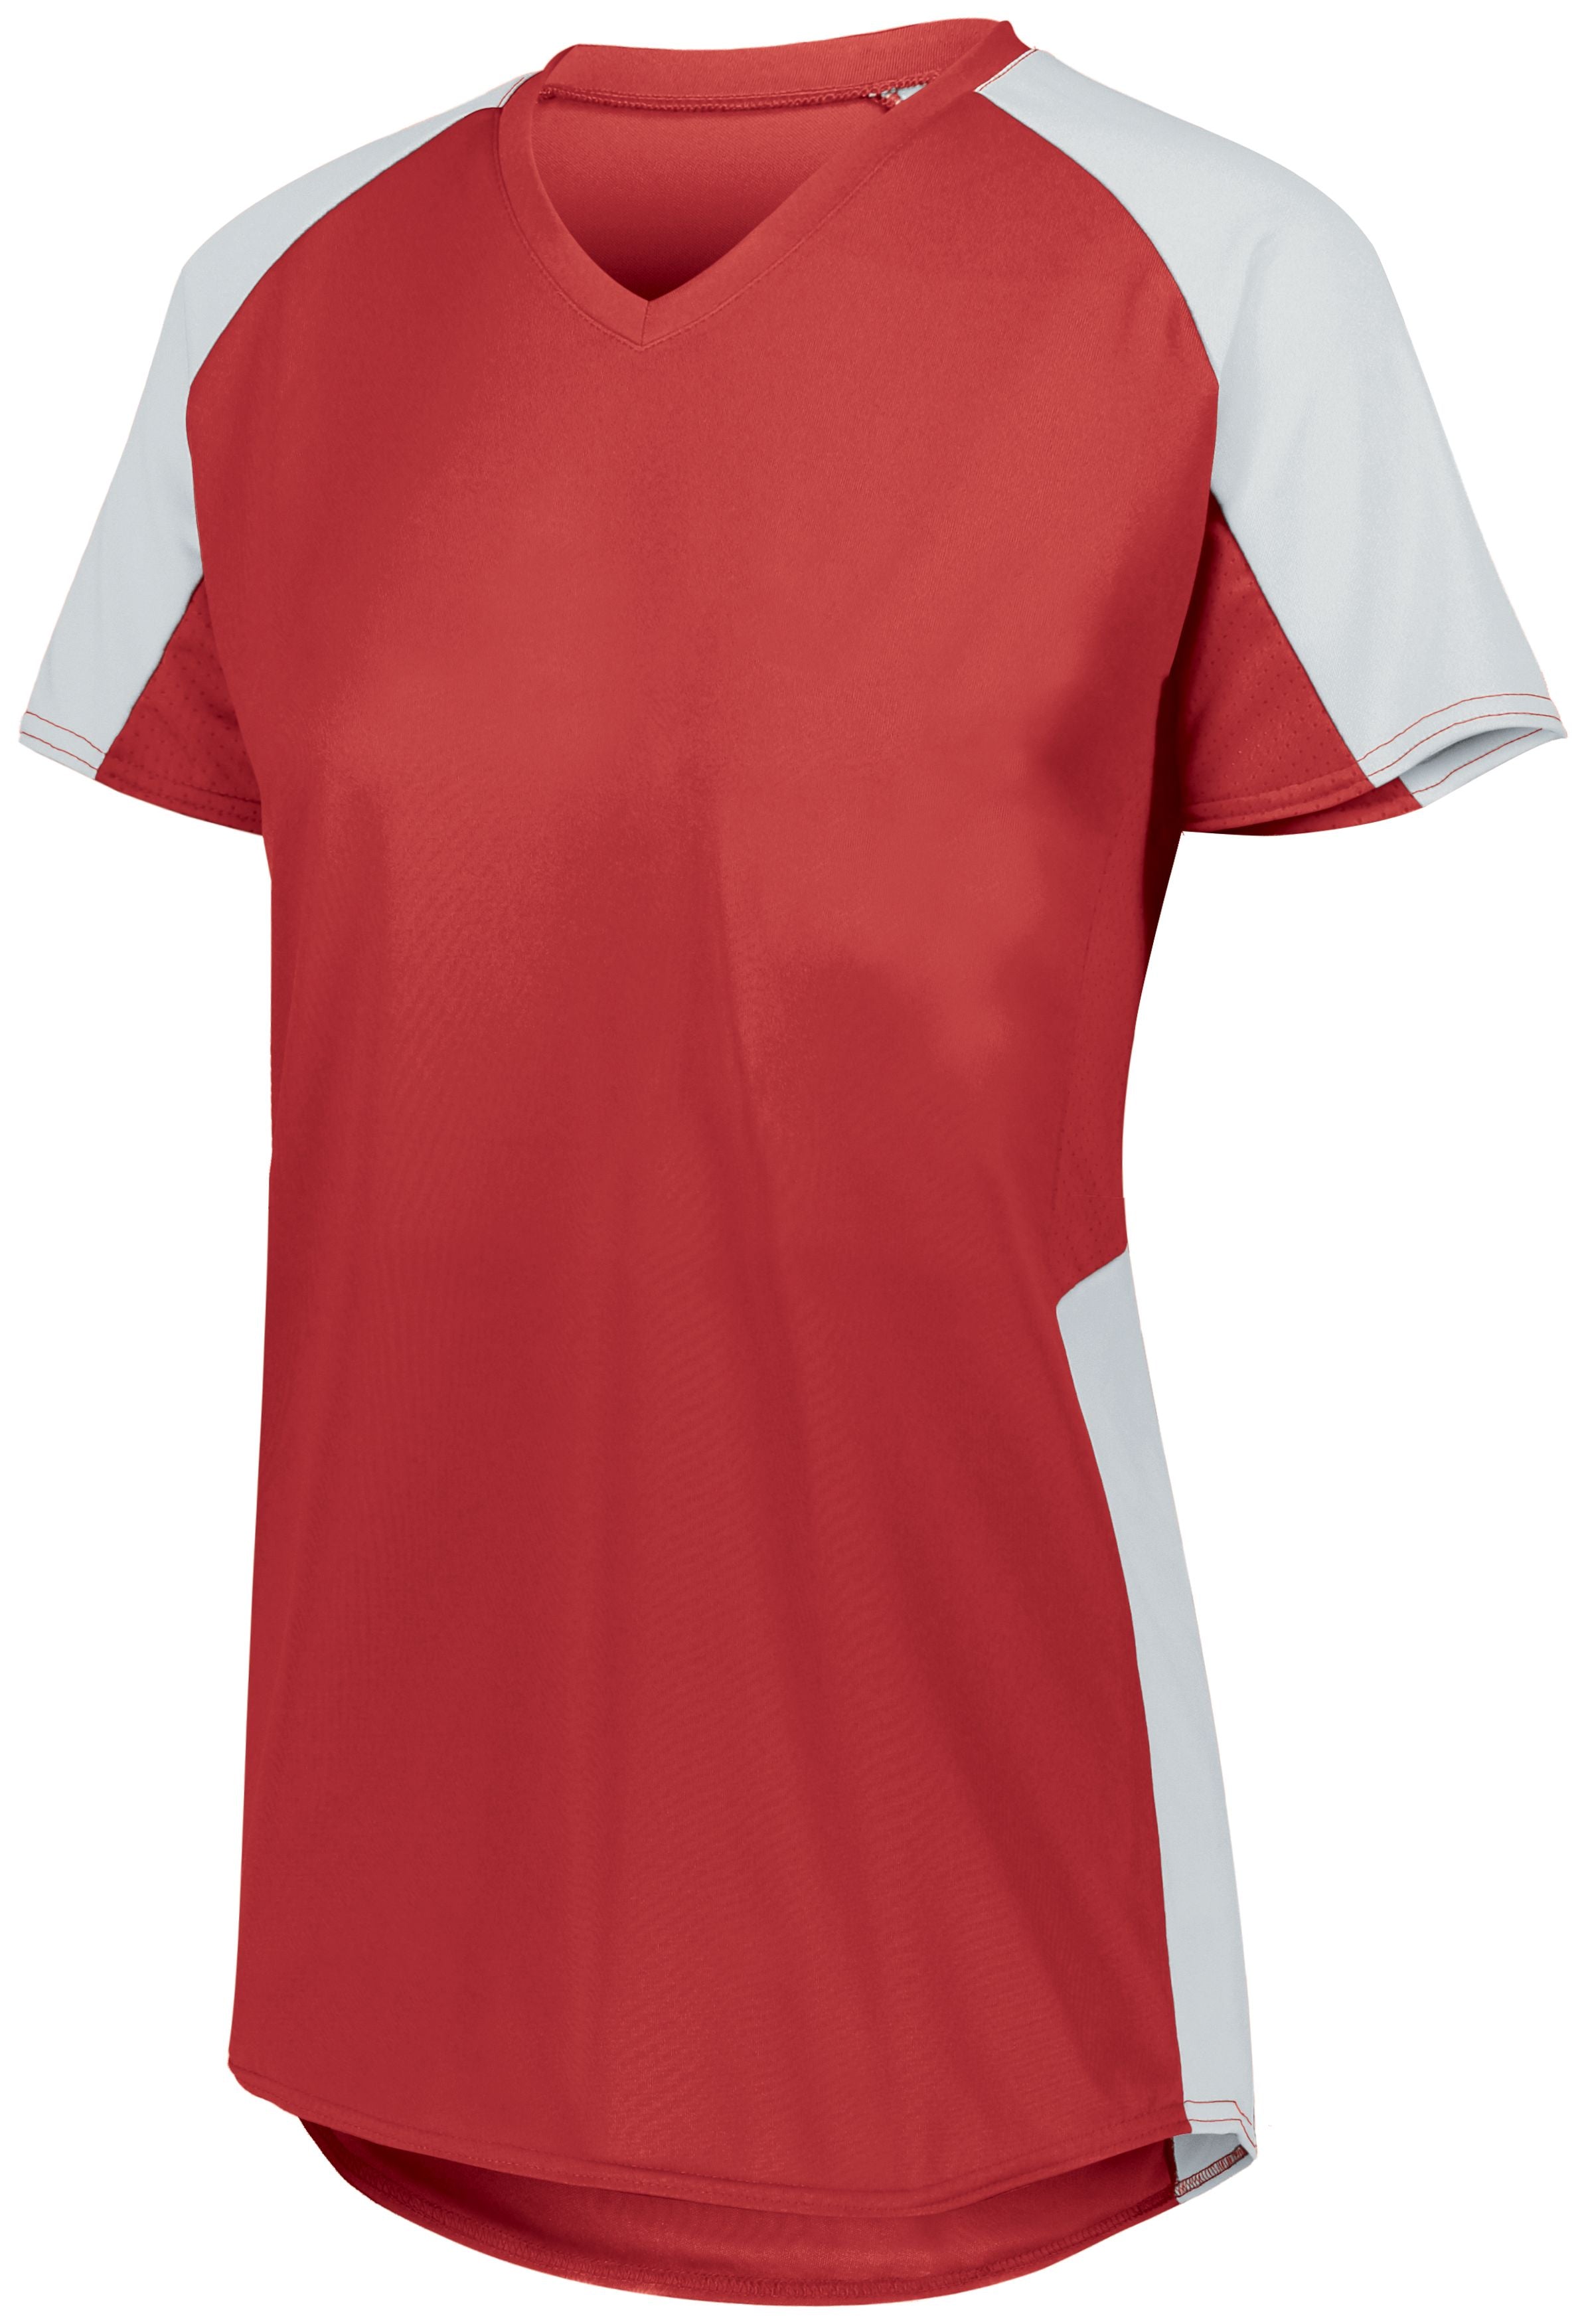 Augusta Sportswear Ladies Cutter Jersey in Red/White  -Part of the Ladies, Ladies-Jersey, Augusta-Products, Softball, Shirts product lines at KanaleyCreations.com